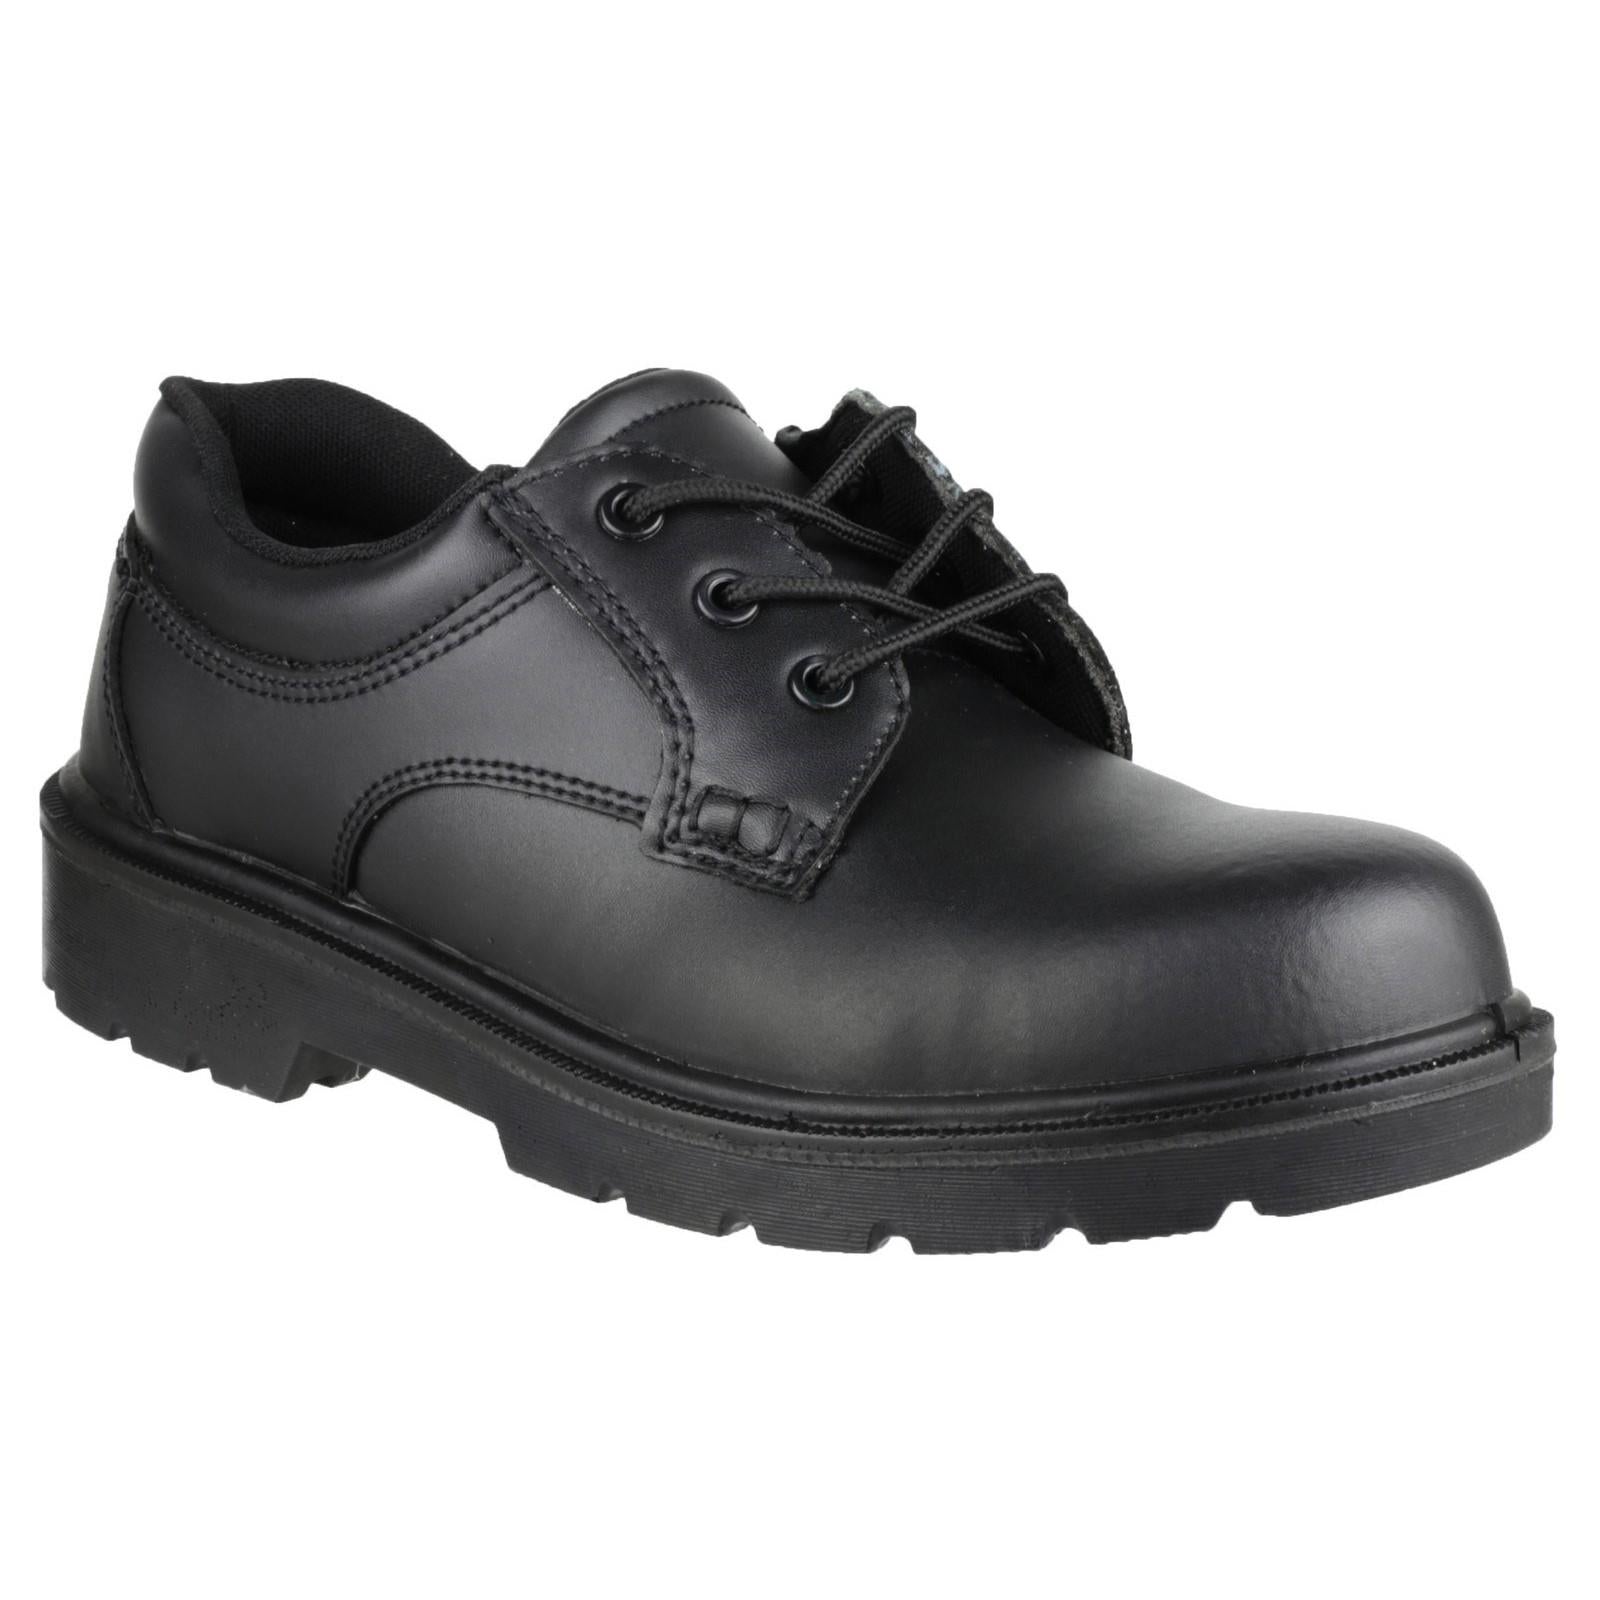 Amblers FS41 S1P black leather steel toe-cap safety shoe with midsole